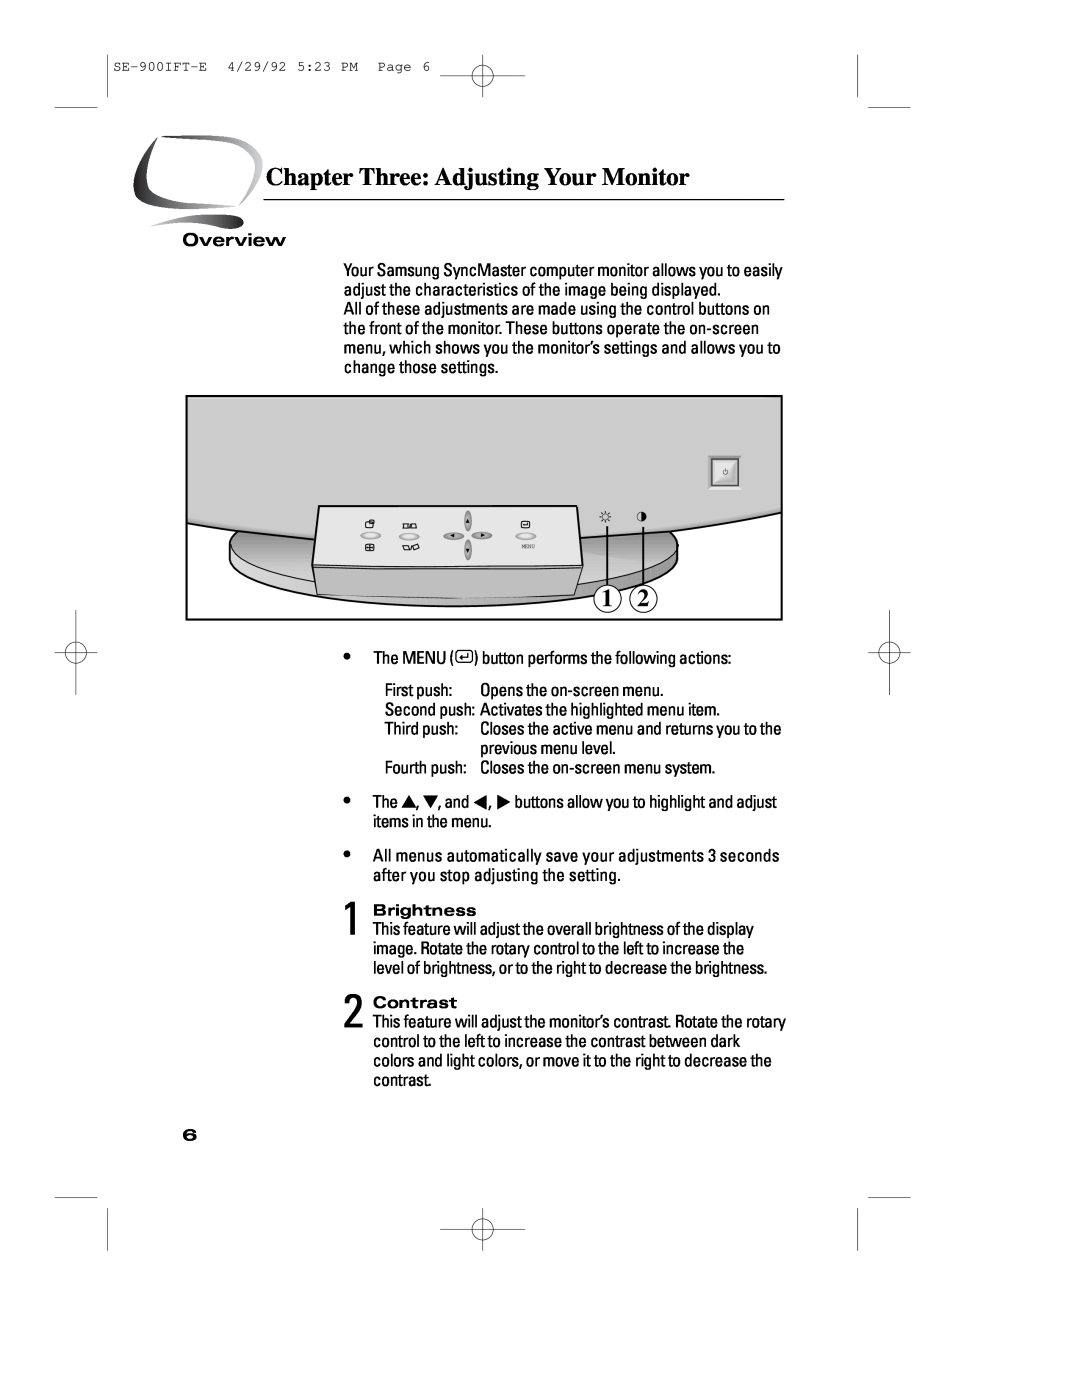 Samsung 900IFT manual Chapter Three Adjusting Your Monitor, Overview, The MENU 